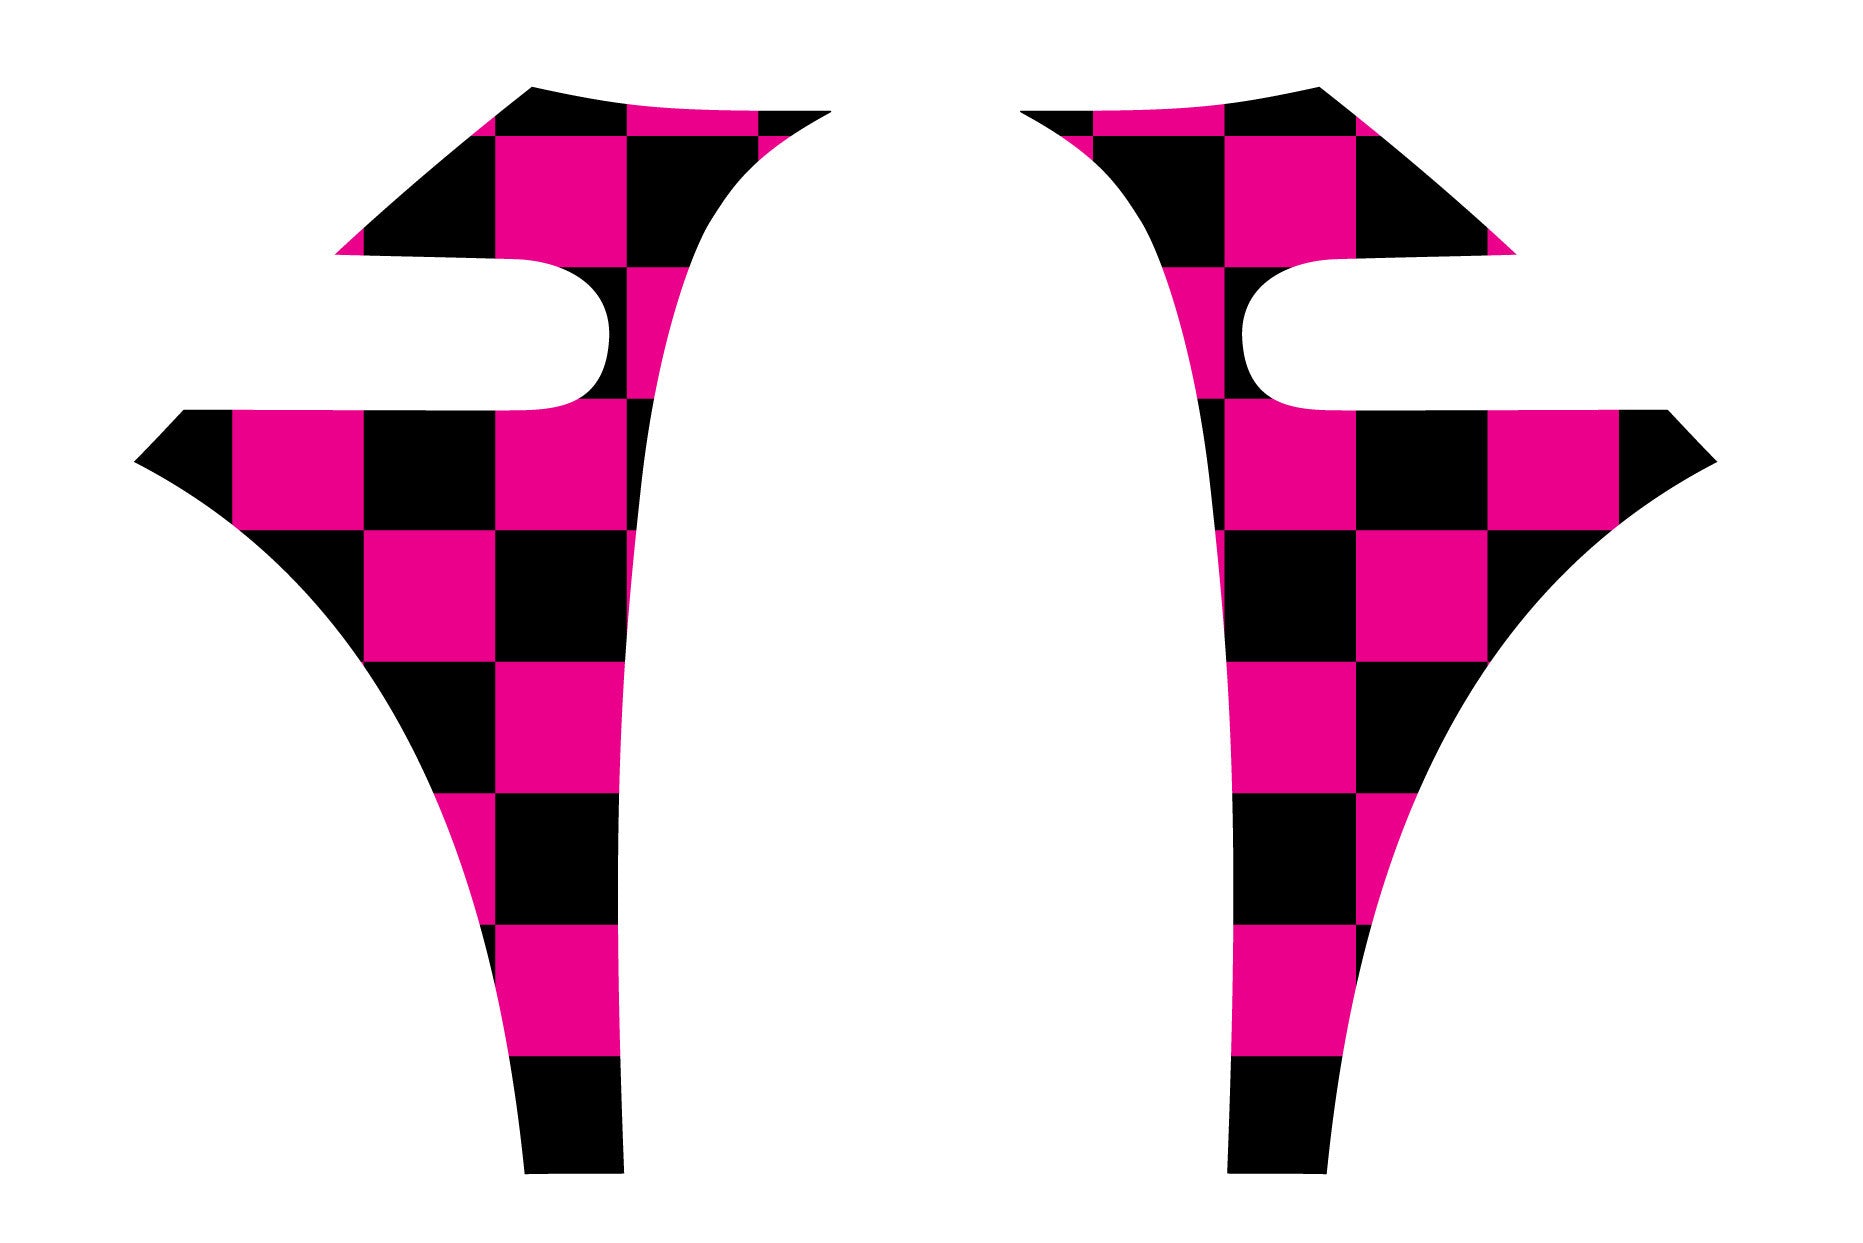 Mini Cooper (2007-2013) Pink Chequered Flag A-Panel Black and Hot Pink Decal Kit - Exact Fit